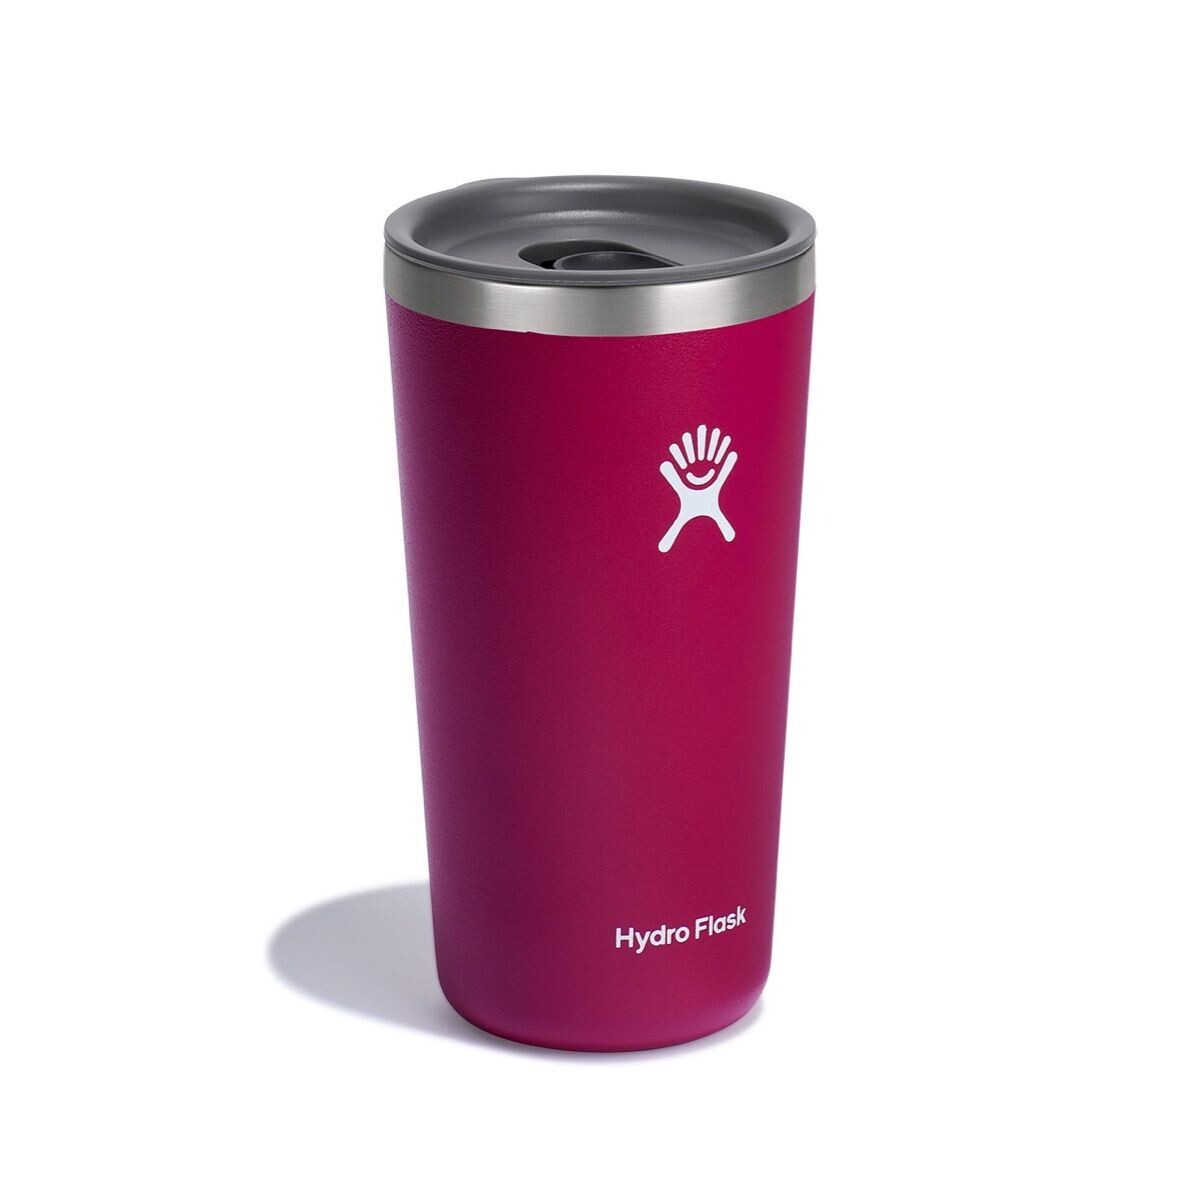 Hydro Flask 20 oz All Around Tumbler - Snapper